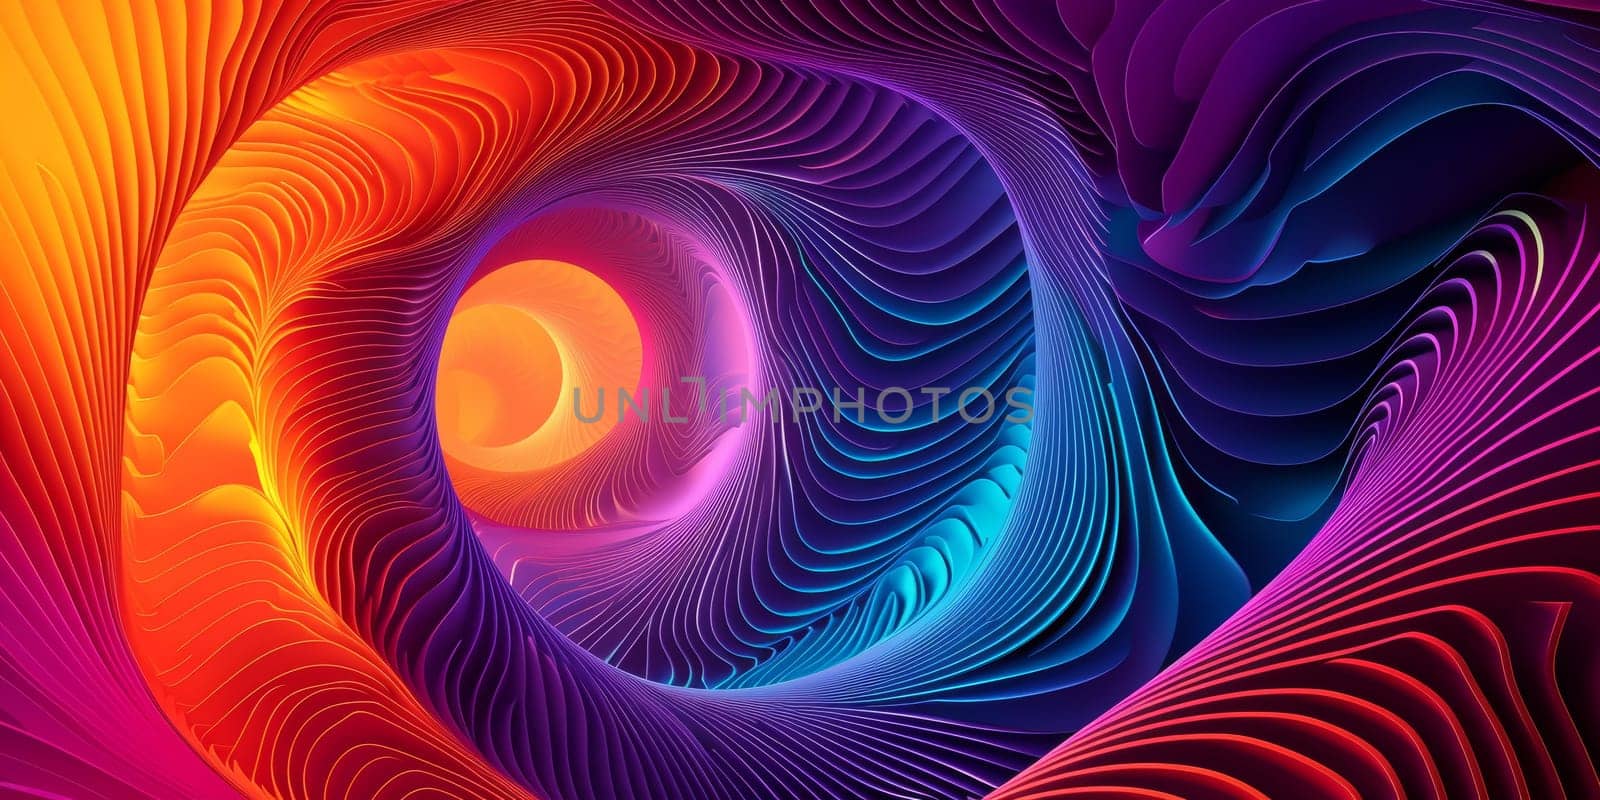 A colorful abstract image of a spiral design with swirls